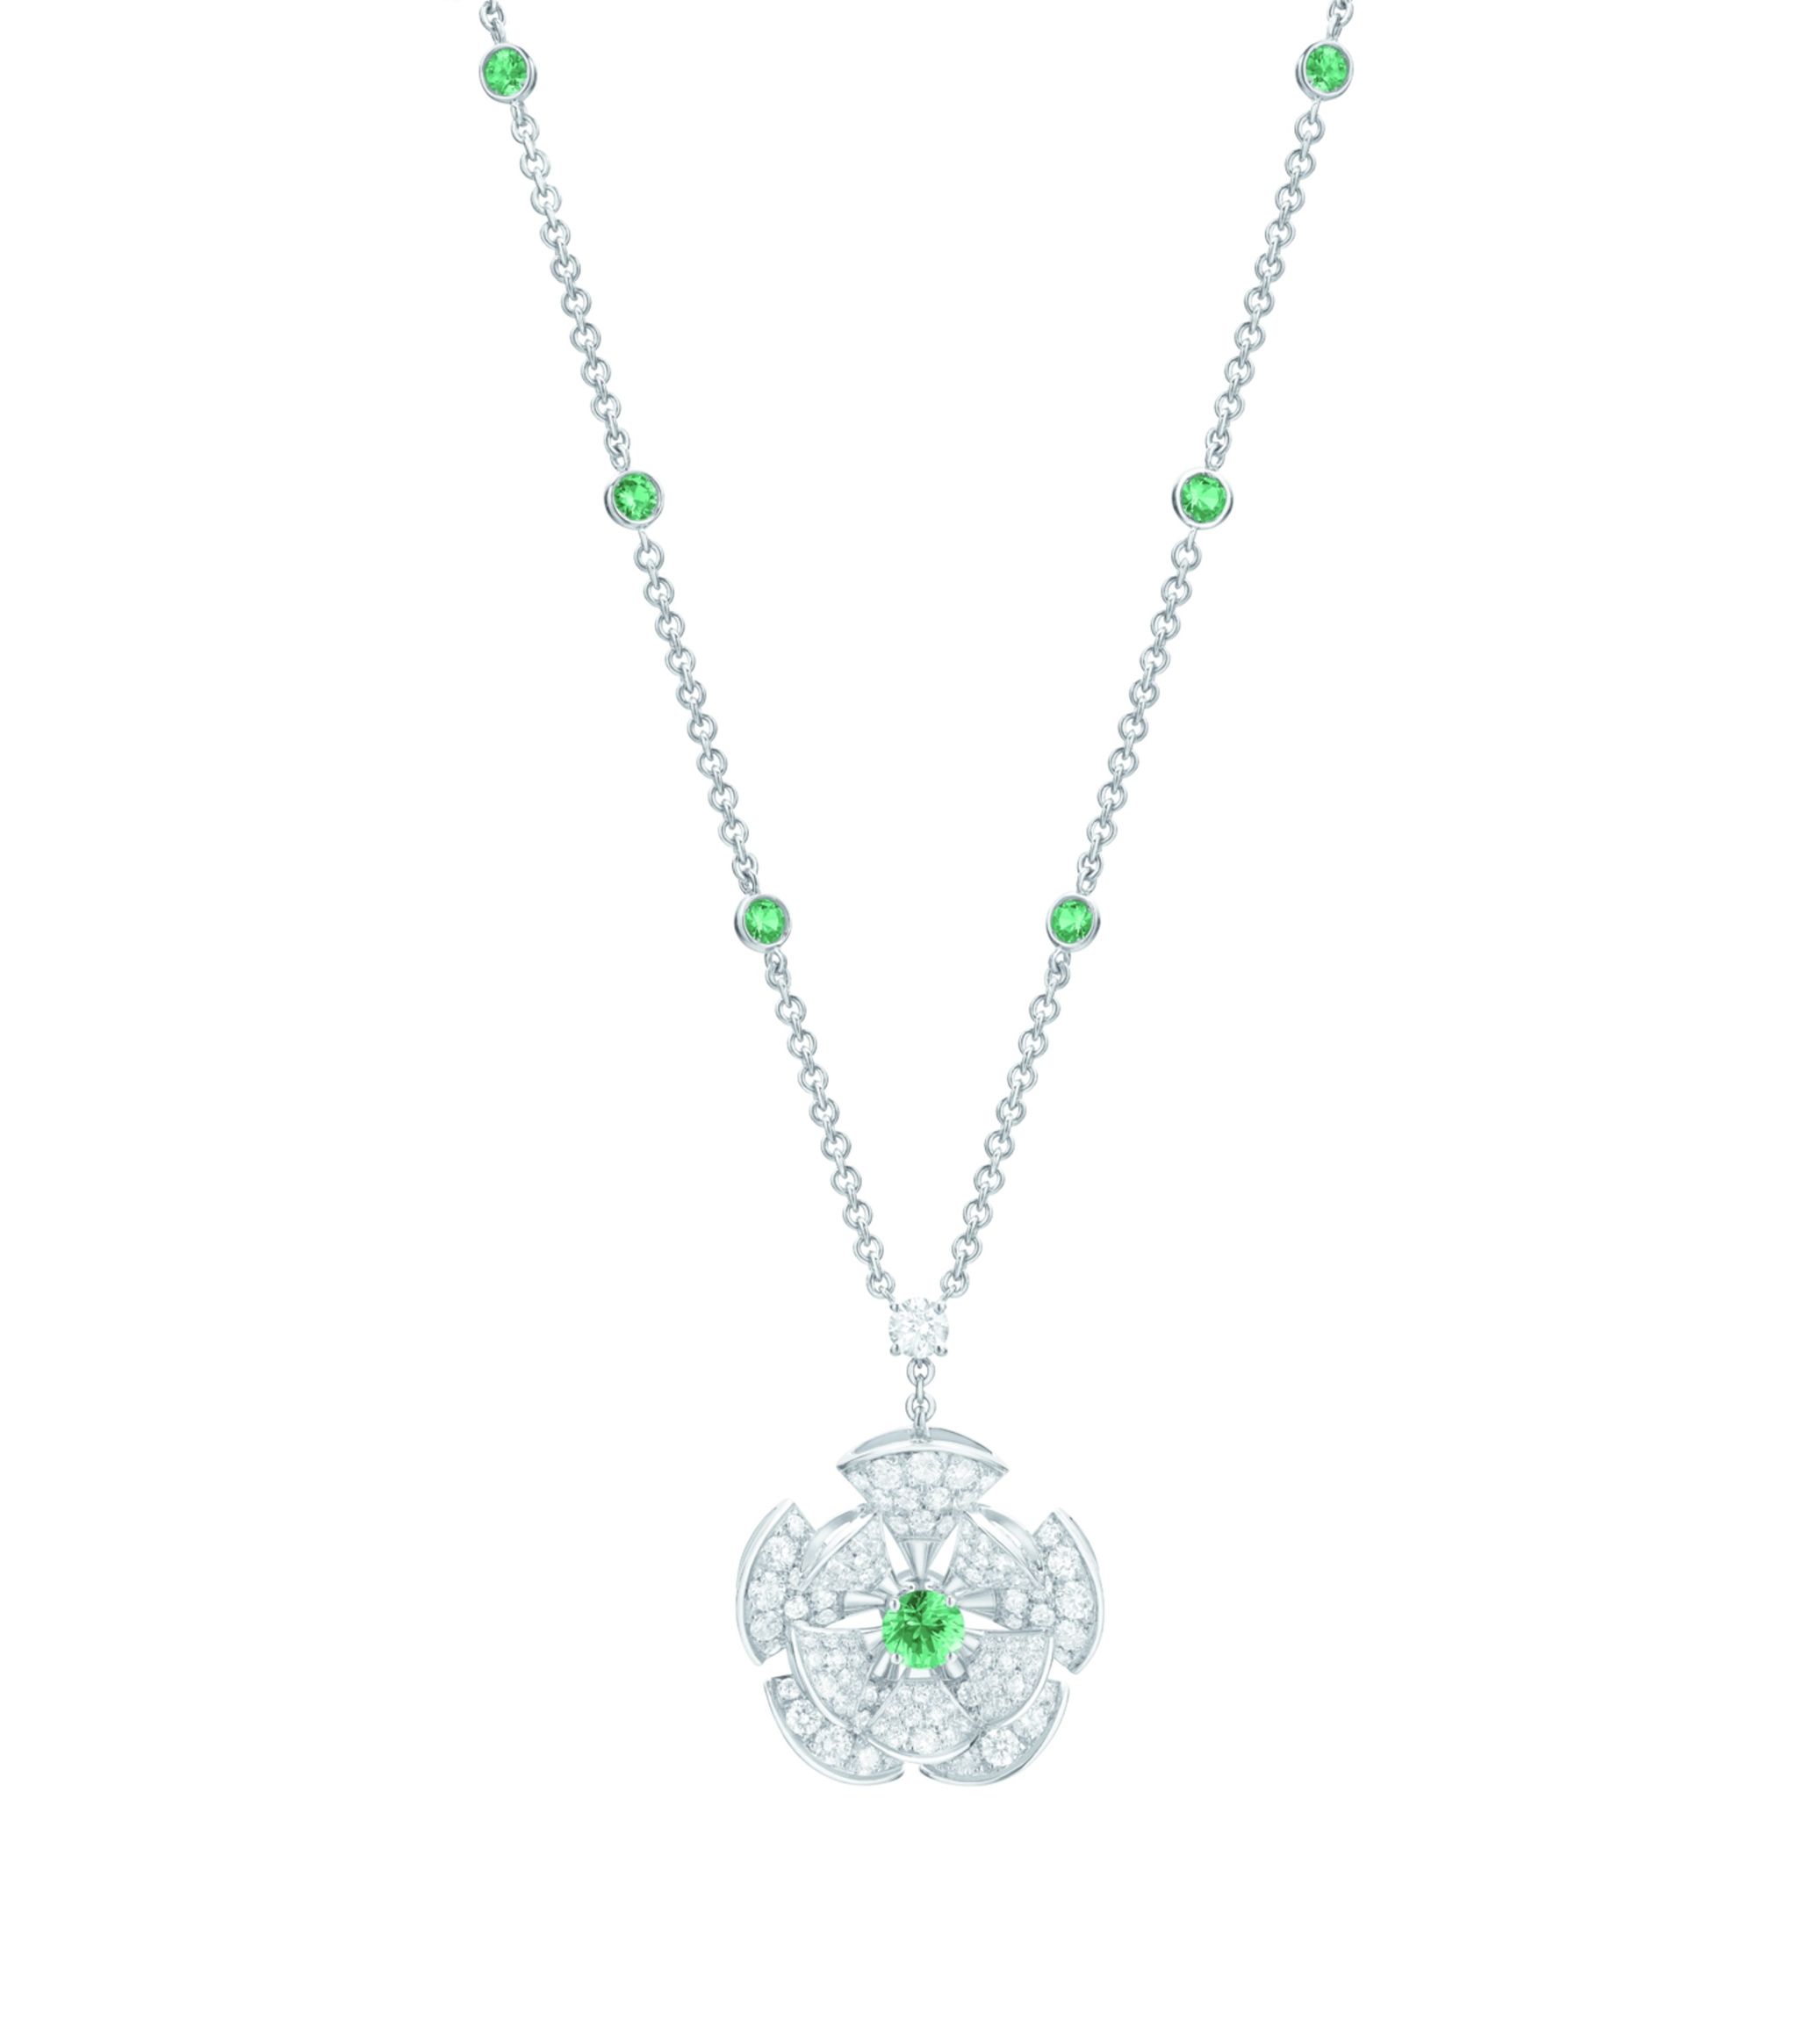 BVLGARI CL DIVA WG PAVE WITH EMERALDS